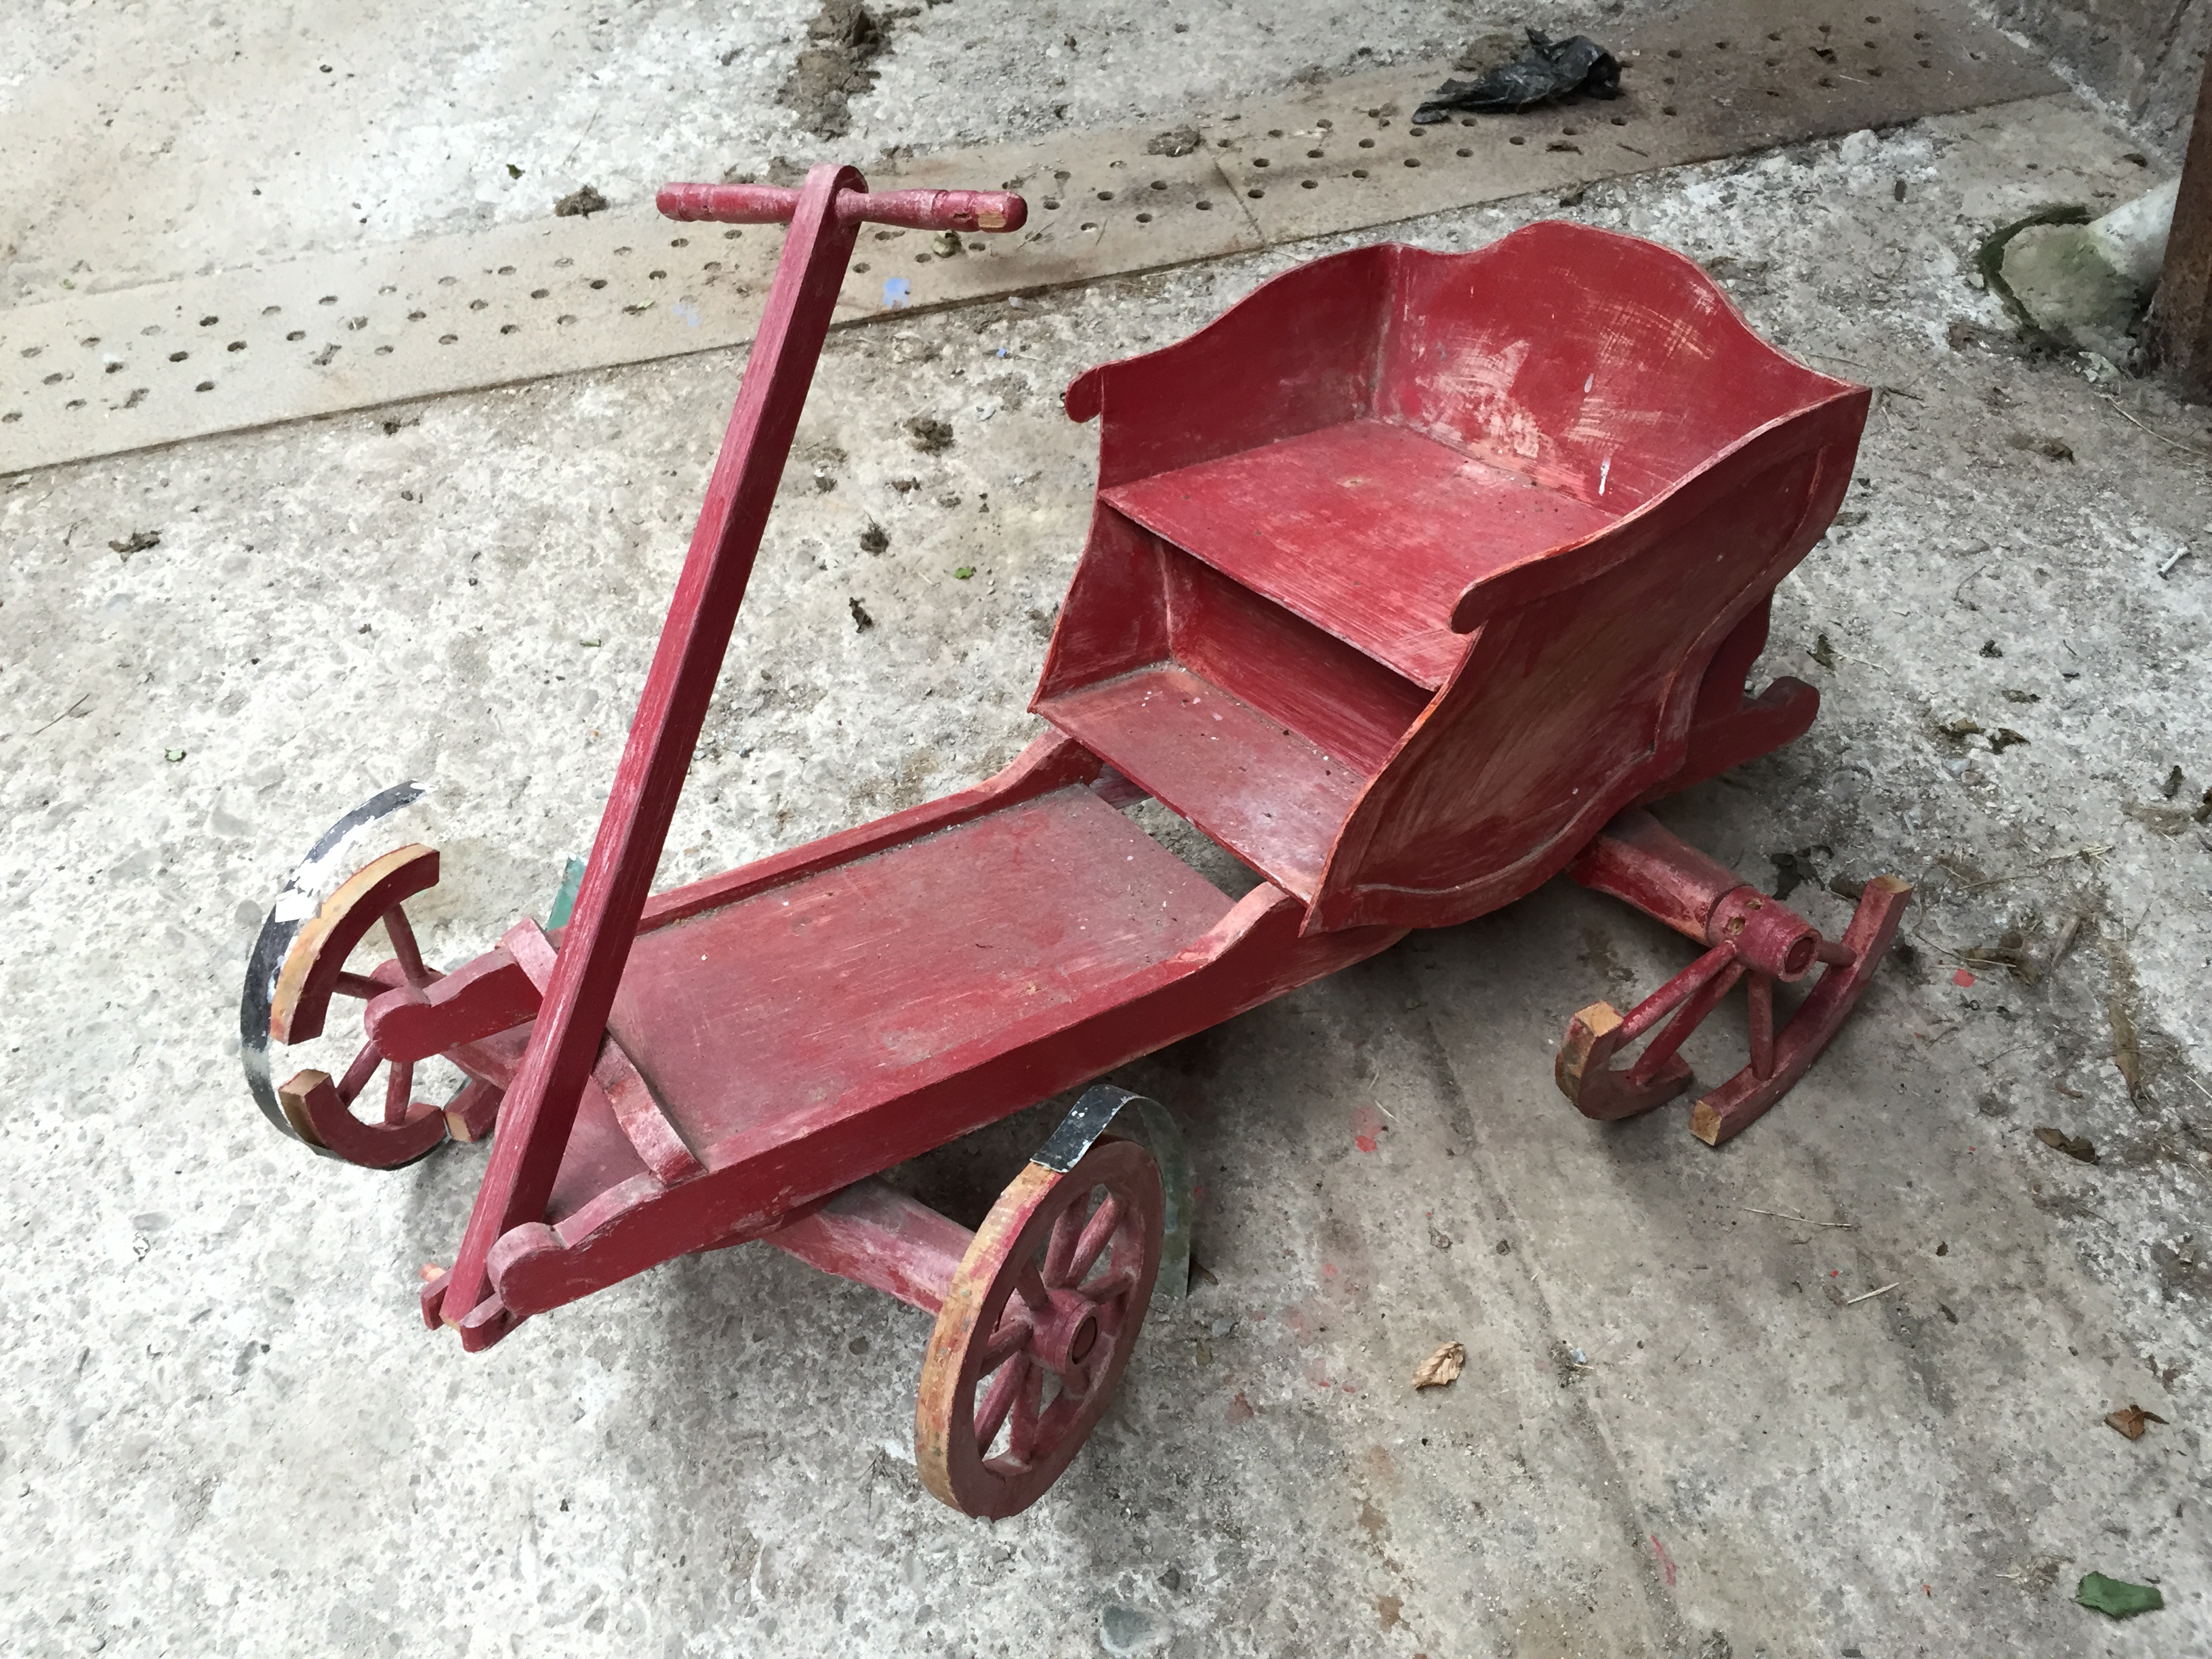 A small child's cart in need of repair.